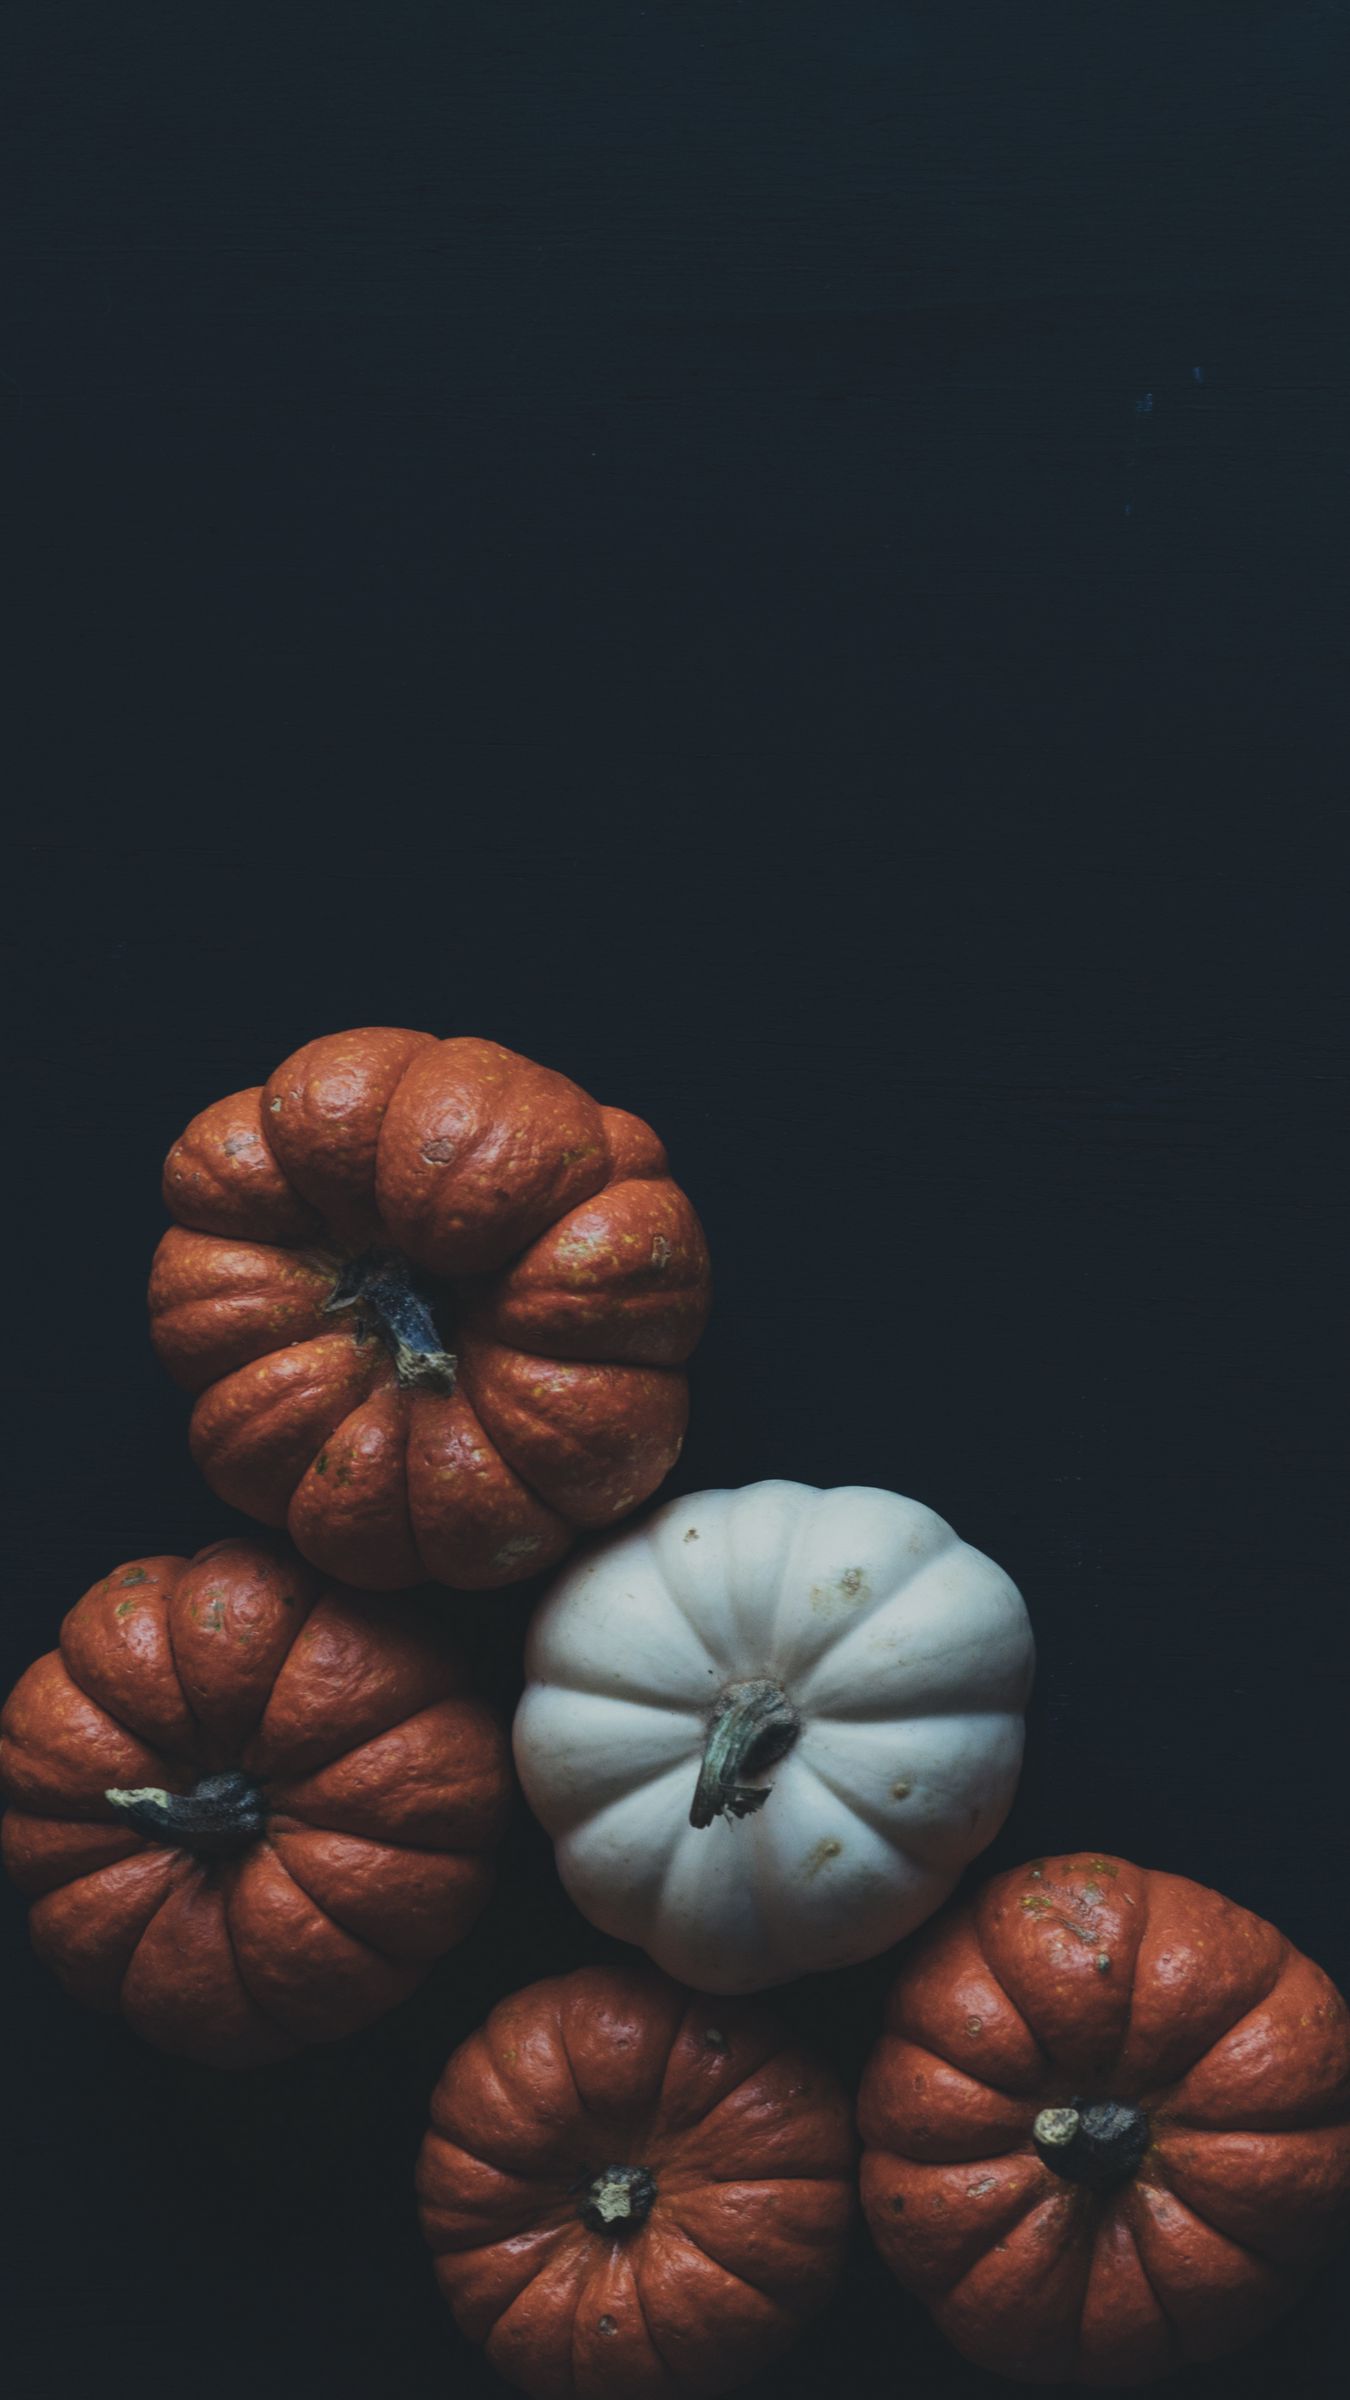 Fall Background Colorful Gourds iPhone Wallpaper  50 Fall iPhone  Wallpapers Thatll Instantly Make You Feel Cozy  POPSUGAR Tech Photo 16